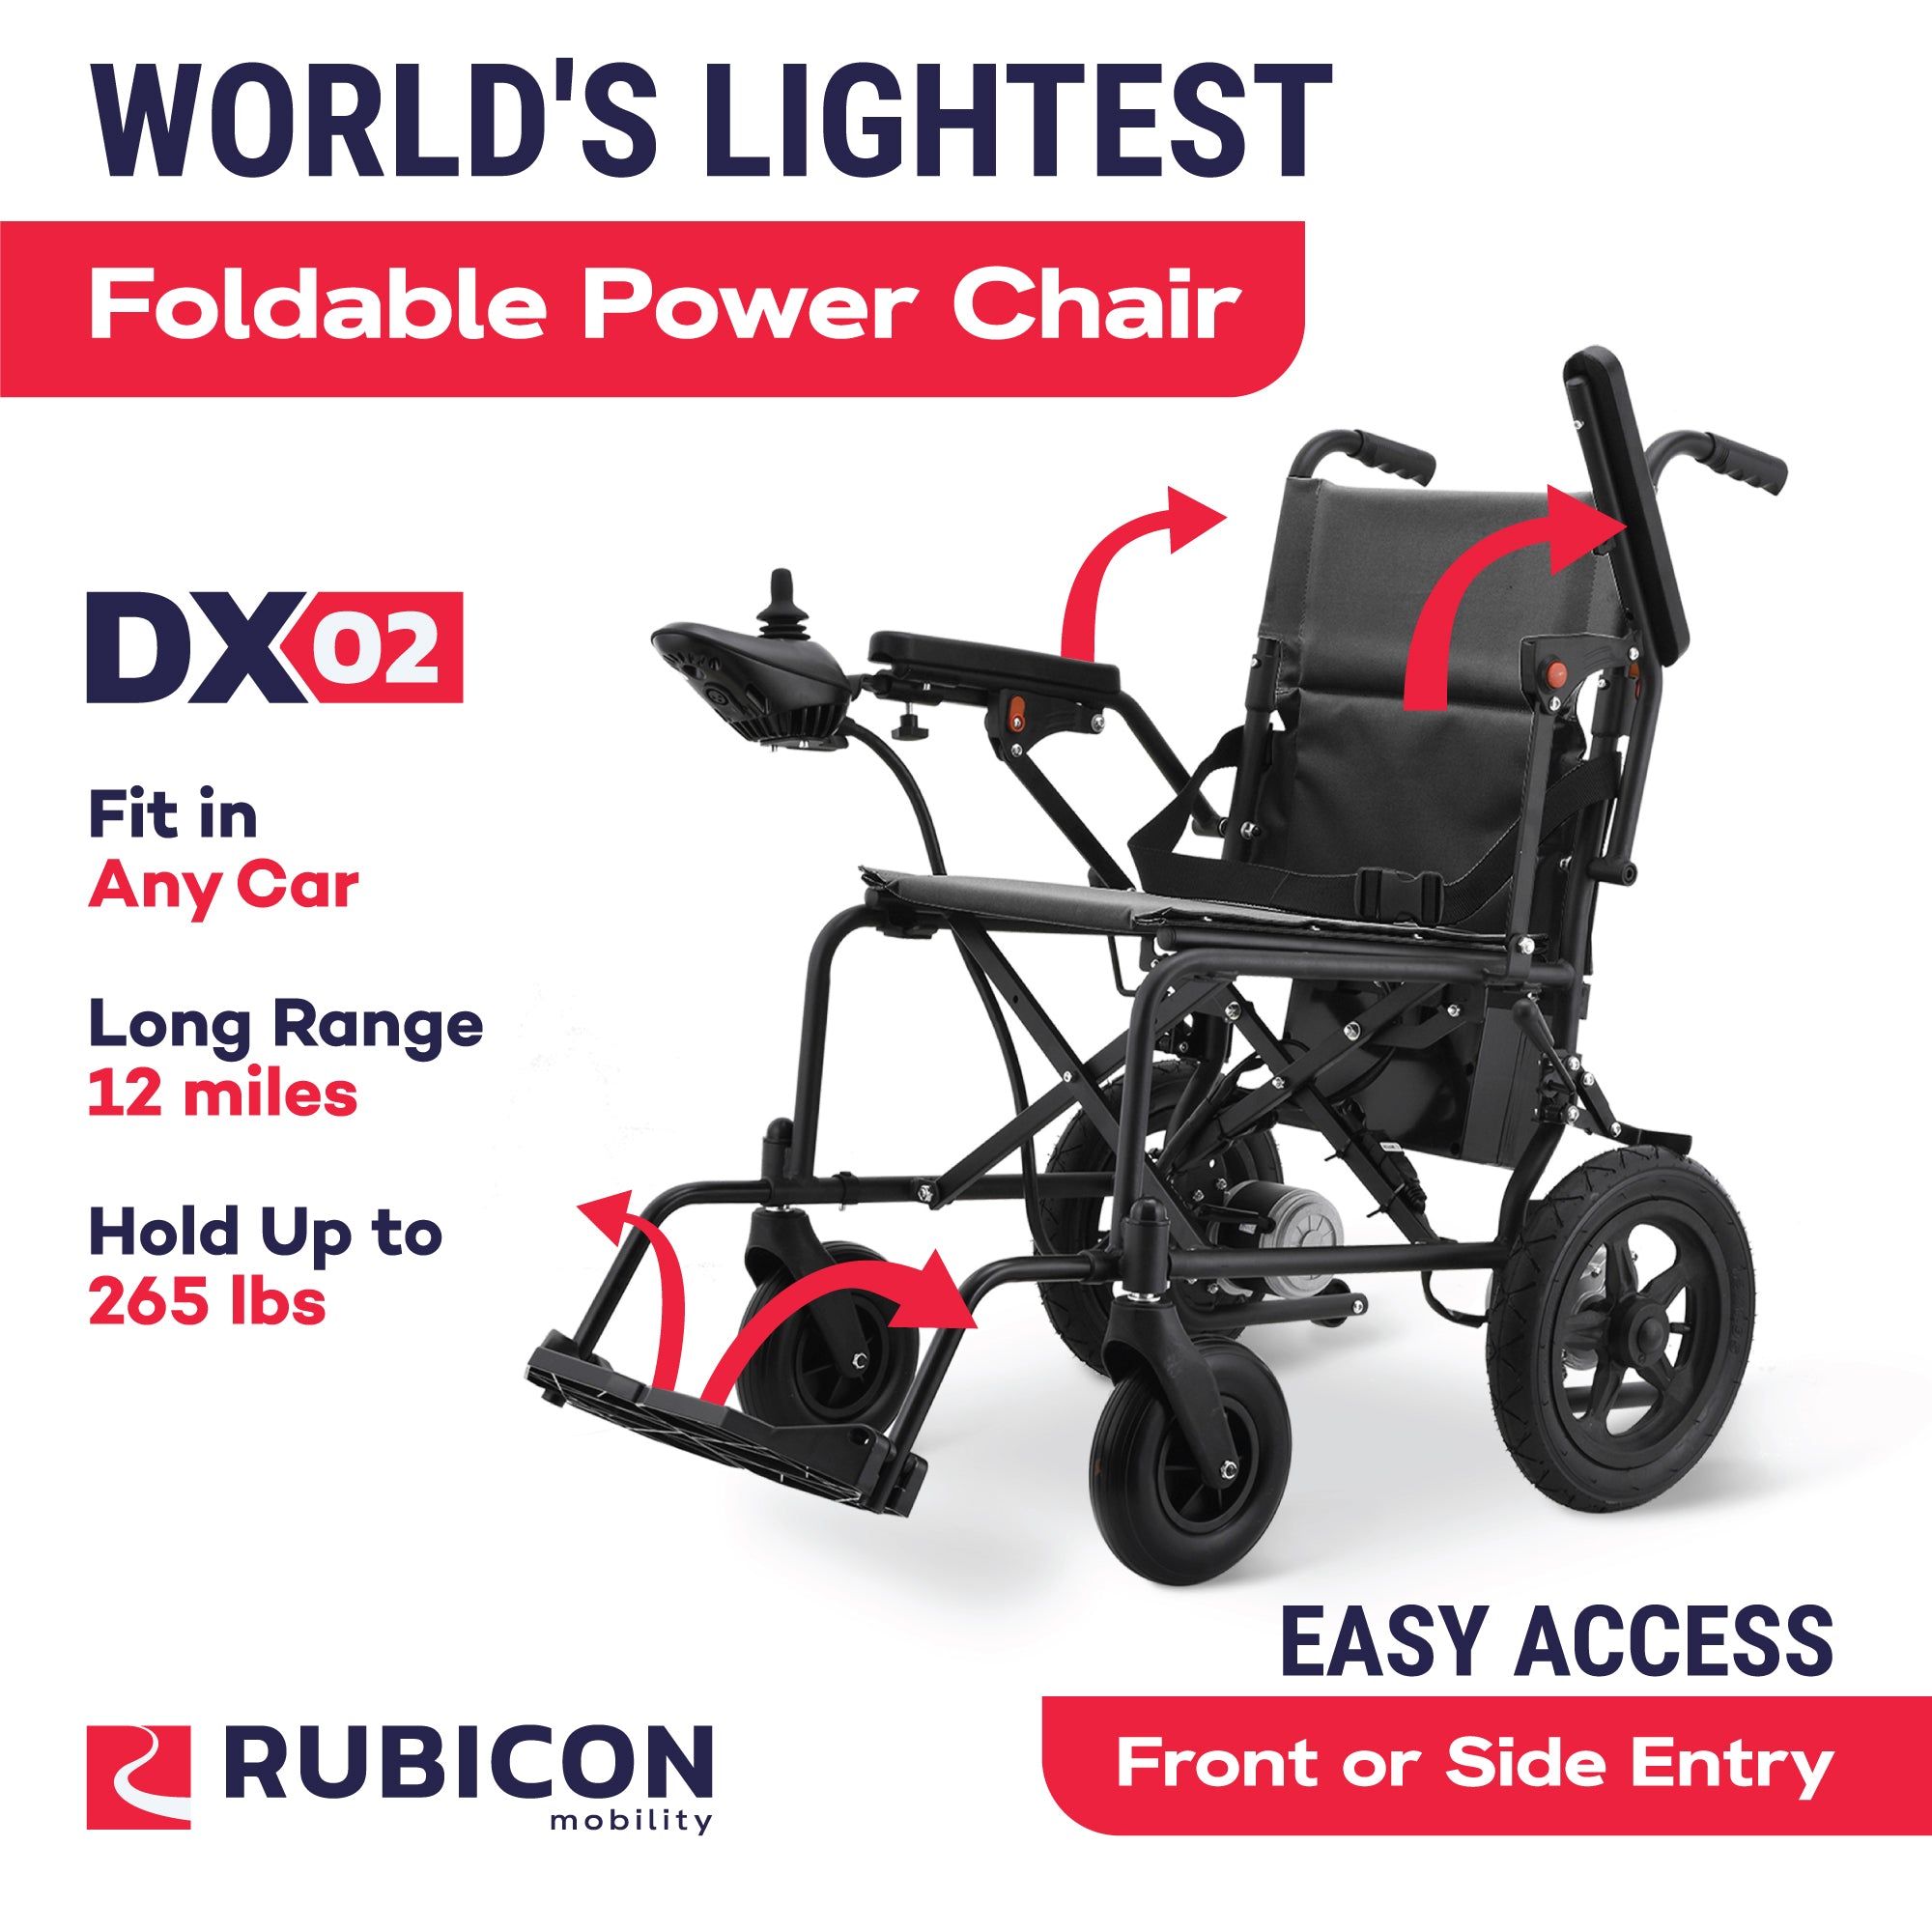 DX03 - Lightweight and Foldable Electric Wheelchair